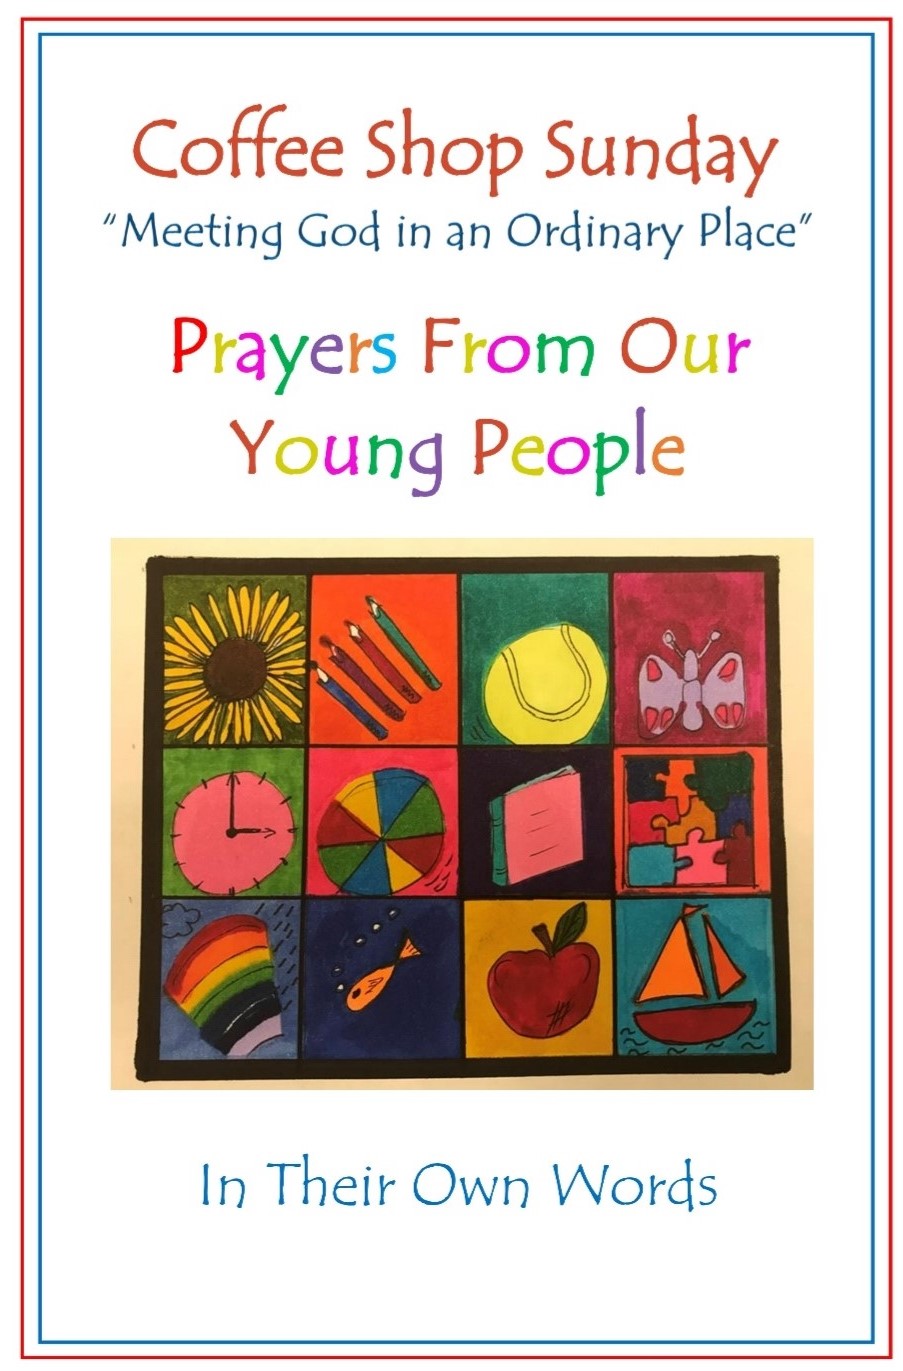 Prayers From Our Young People - In Their Own Words